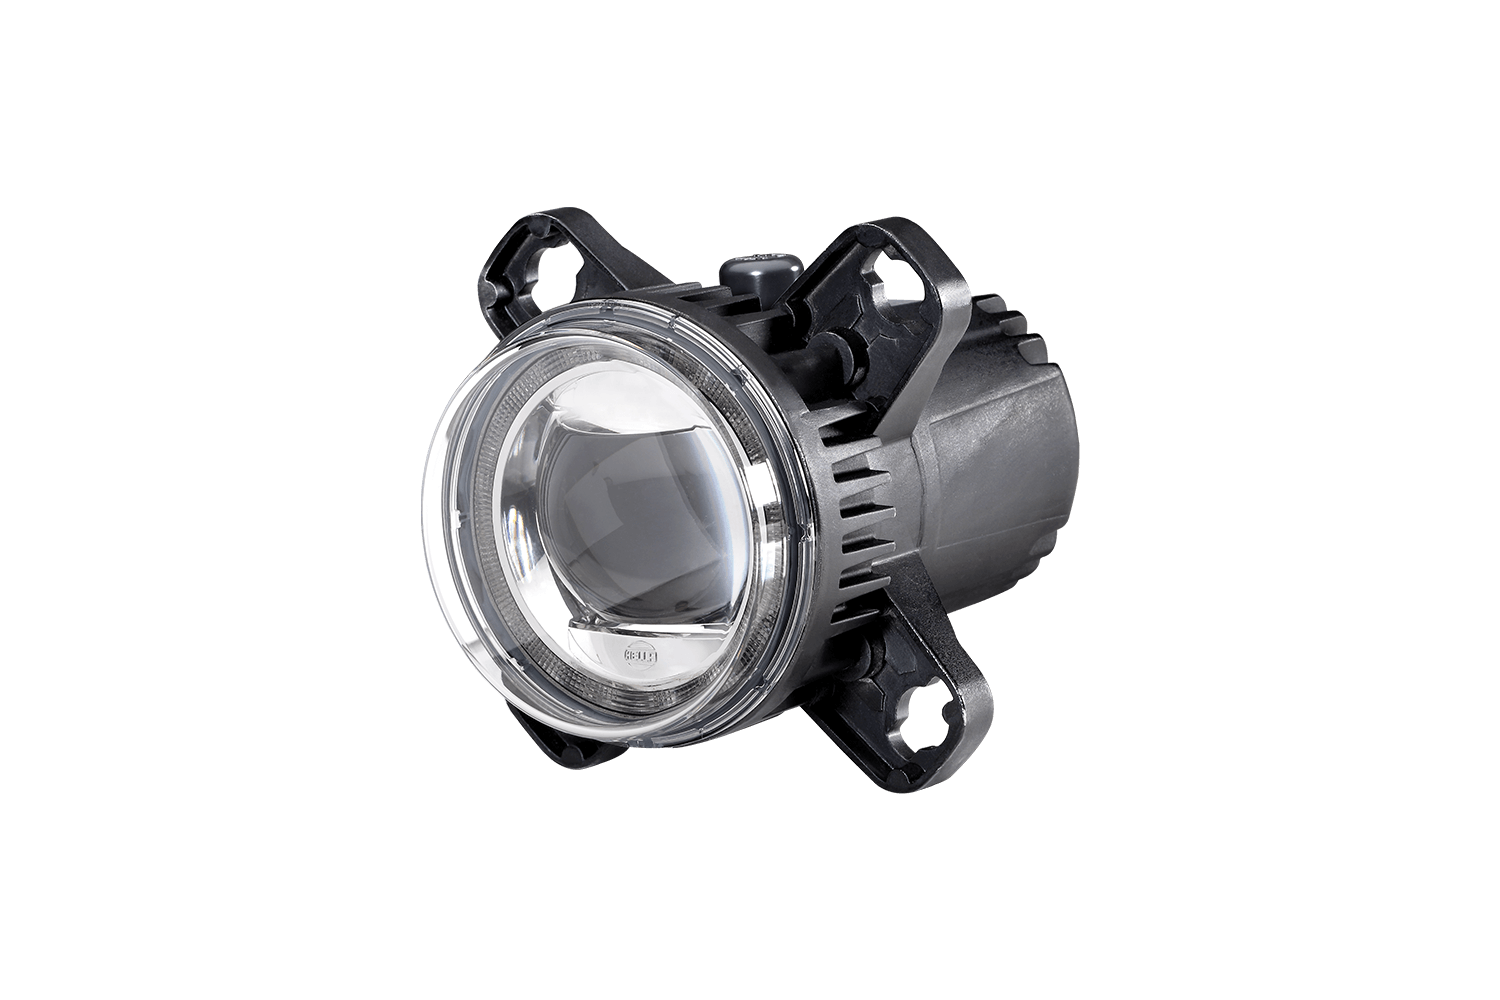 L 4060 LED high beam headlamp from Hella offered by Patlon in Canada